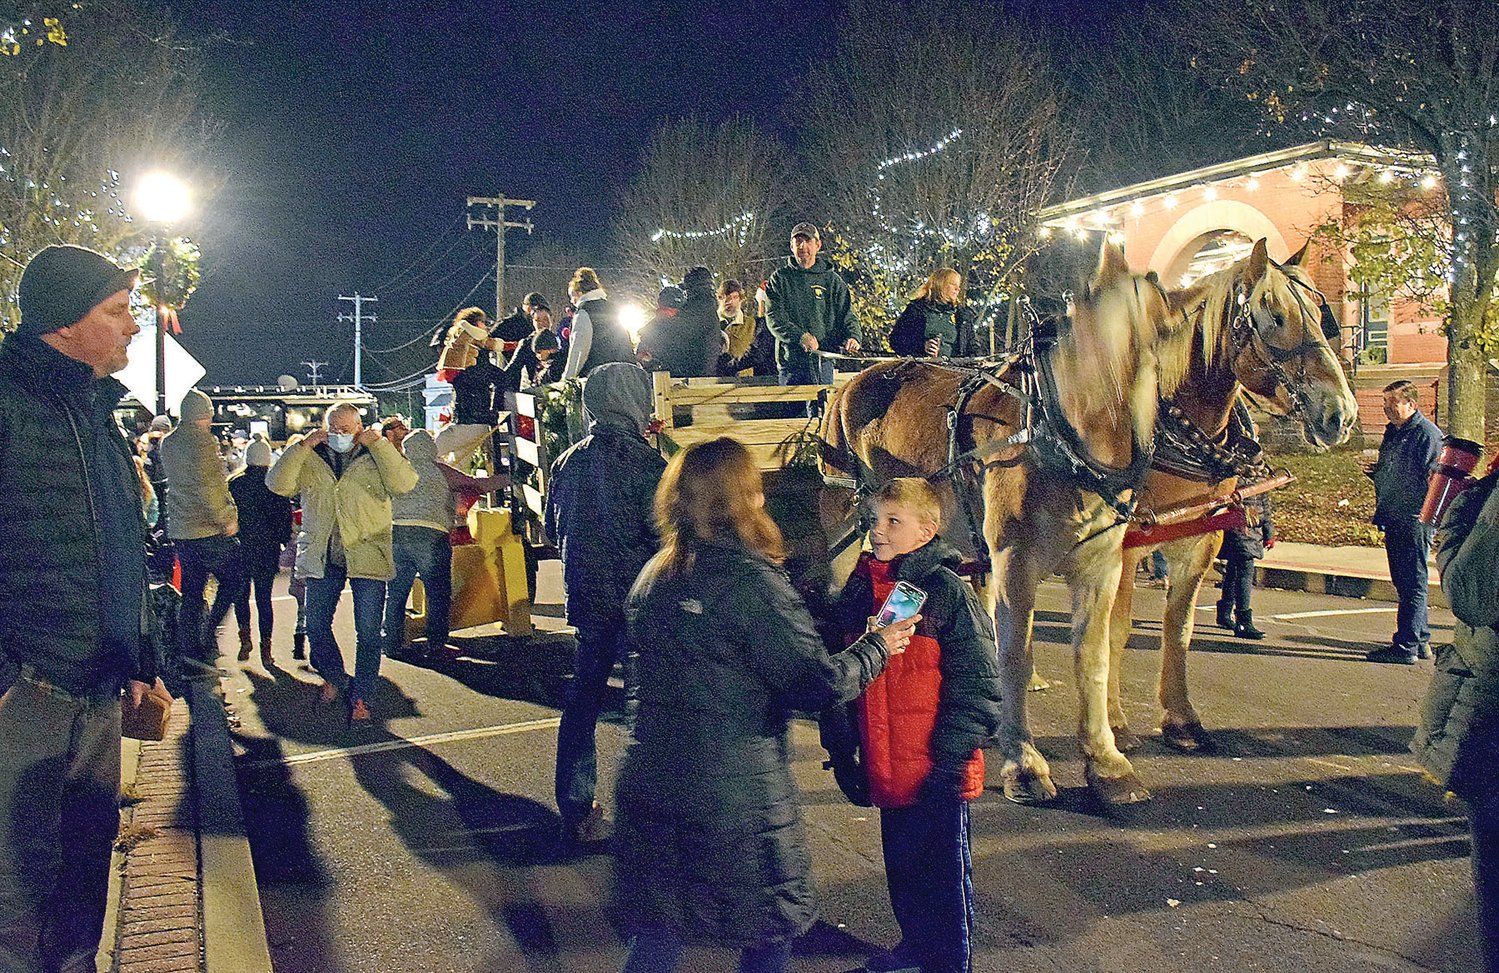 Community members take a horse-drawn carriage ride.